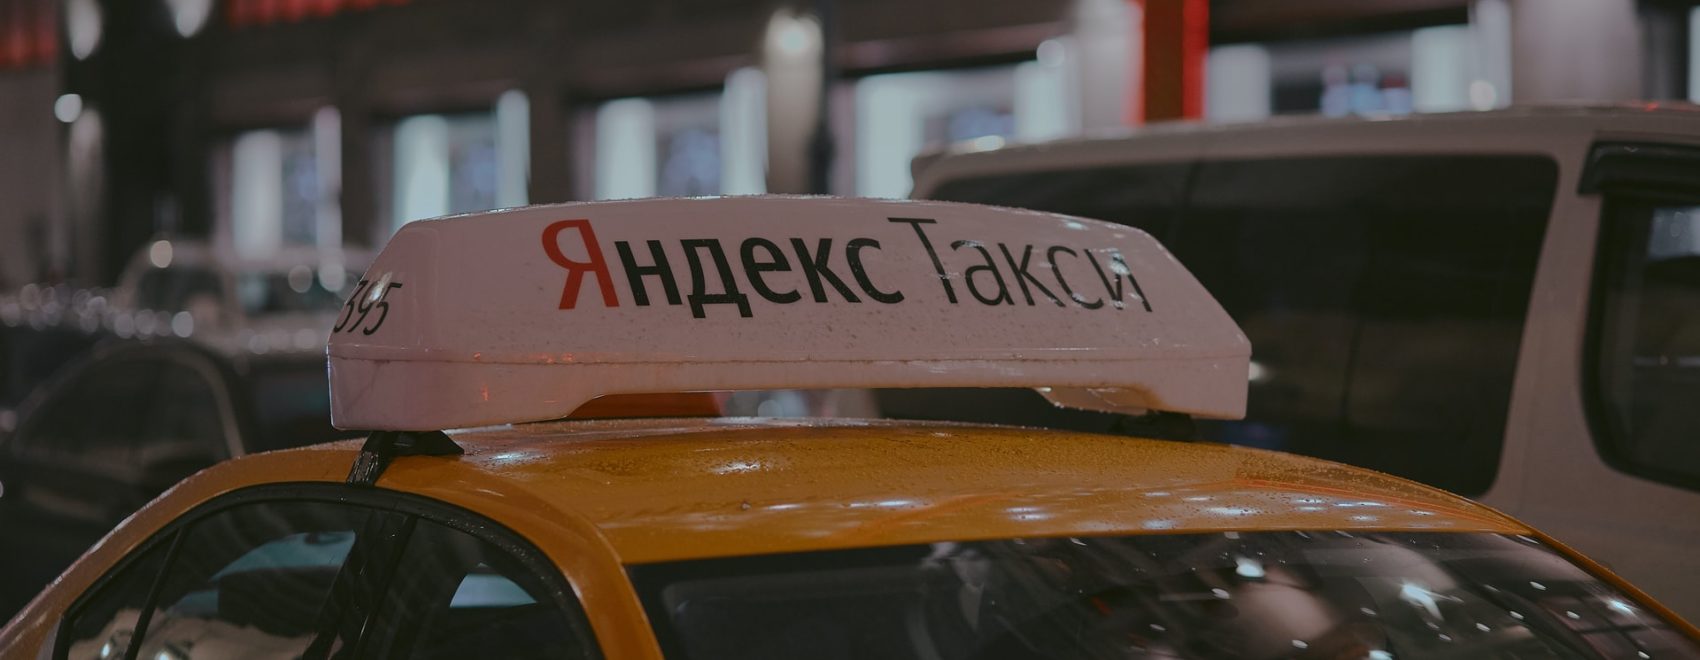 Yandex-Taxi-in-Moscow